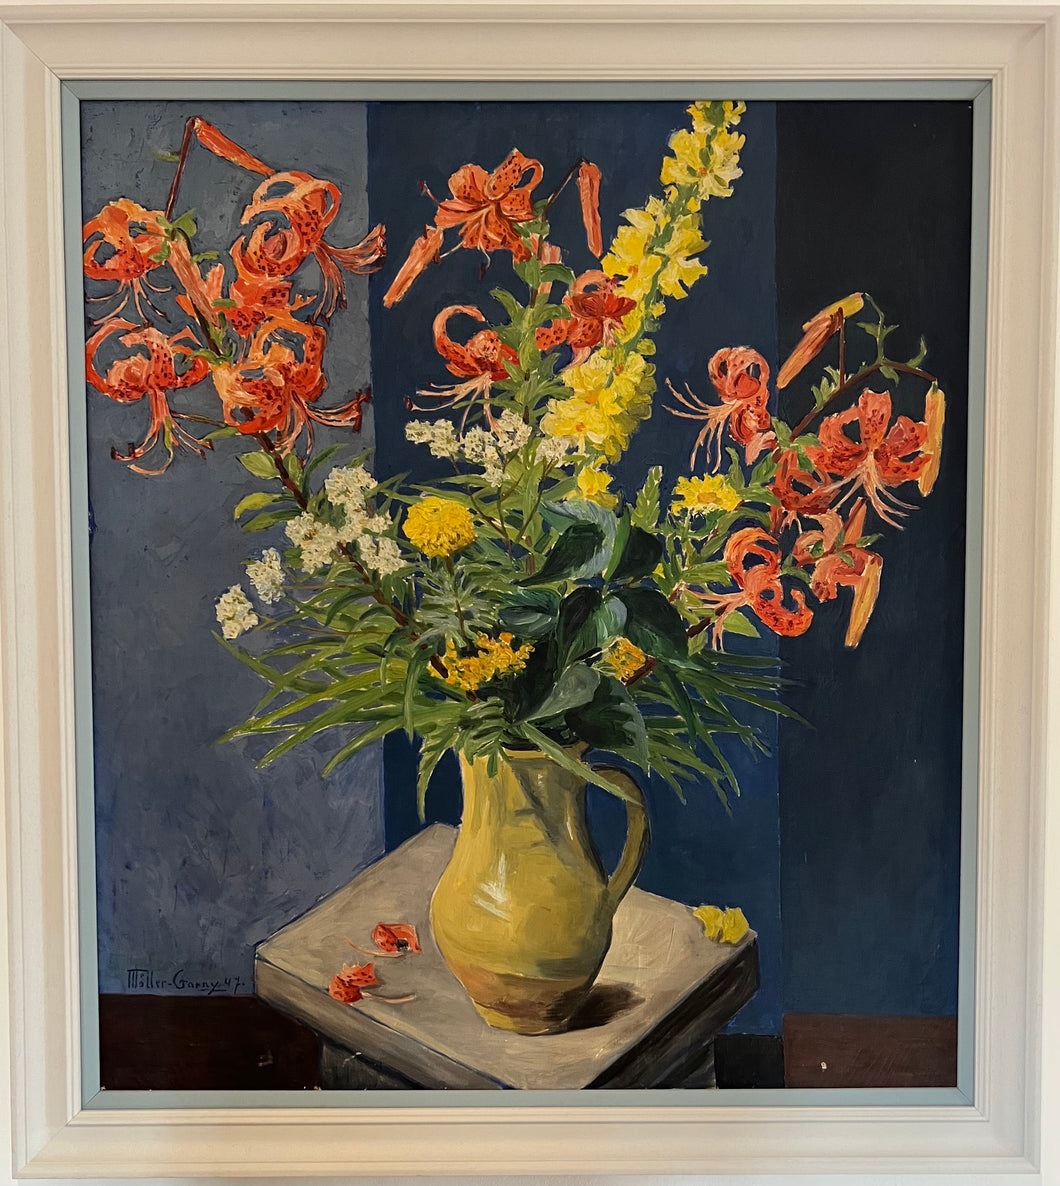 Oil Painting on canvas: Flowers in a yellow jug (artist Moller Garny 1947)